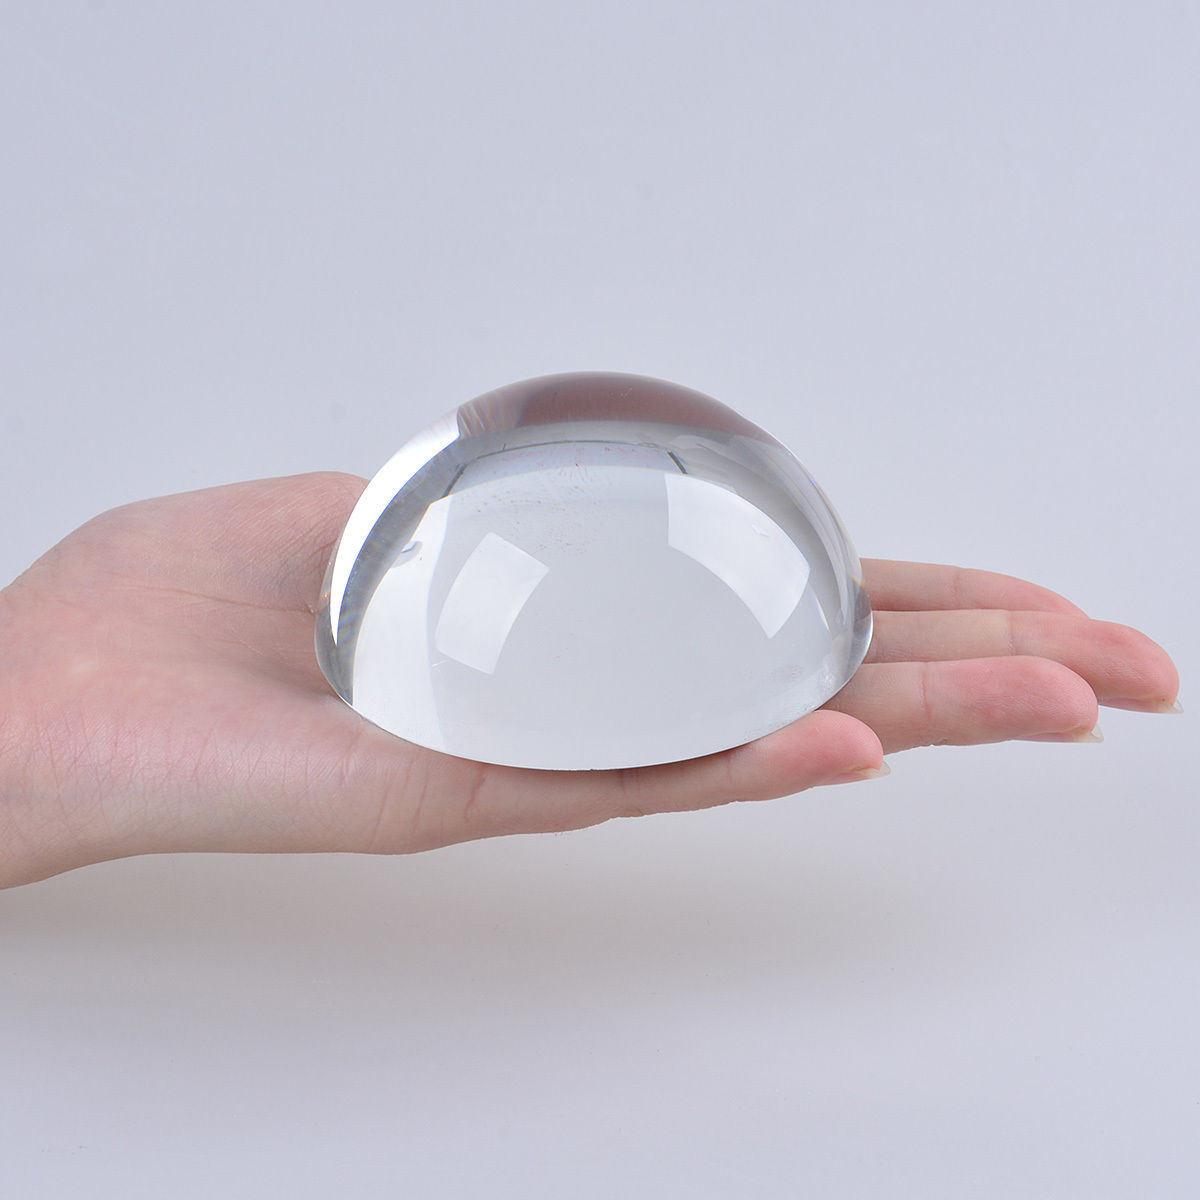 Large Magnifying Glass Paperweight Dome Magnifiers Semi Crystal Ball